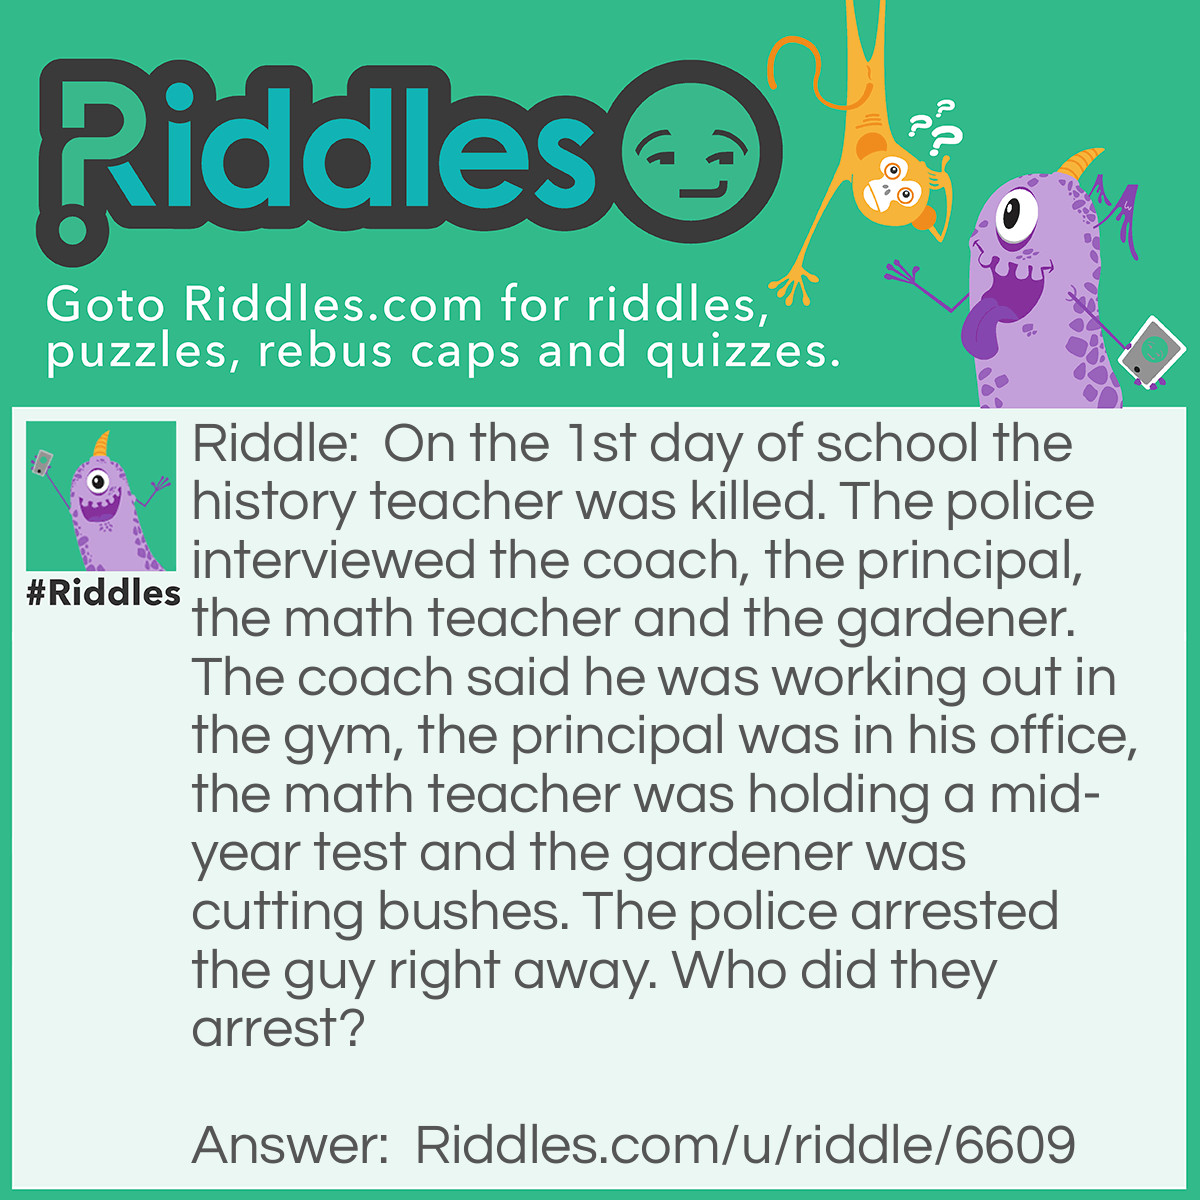 Riddle: On the 1st day of school the history teacher was killed. The police interviewed the coach, the principal, the math teacher and the gardener. The coach said he was working out in the gym, the principal was in his office, the math teacher was holding a mid-year test and the gardener was cutting bushes. The police arrested the guy right away. Who did they arrest? Answer: The Math Teacher.